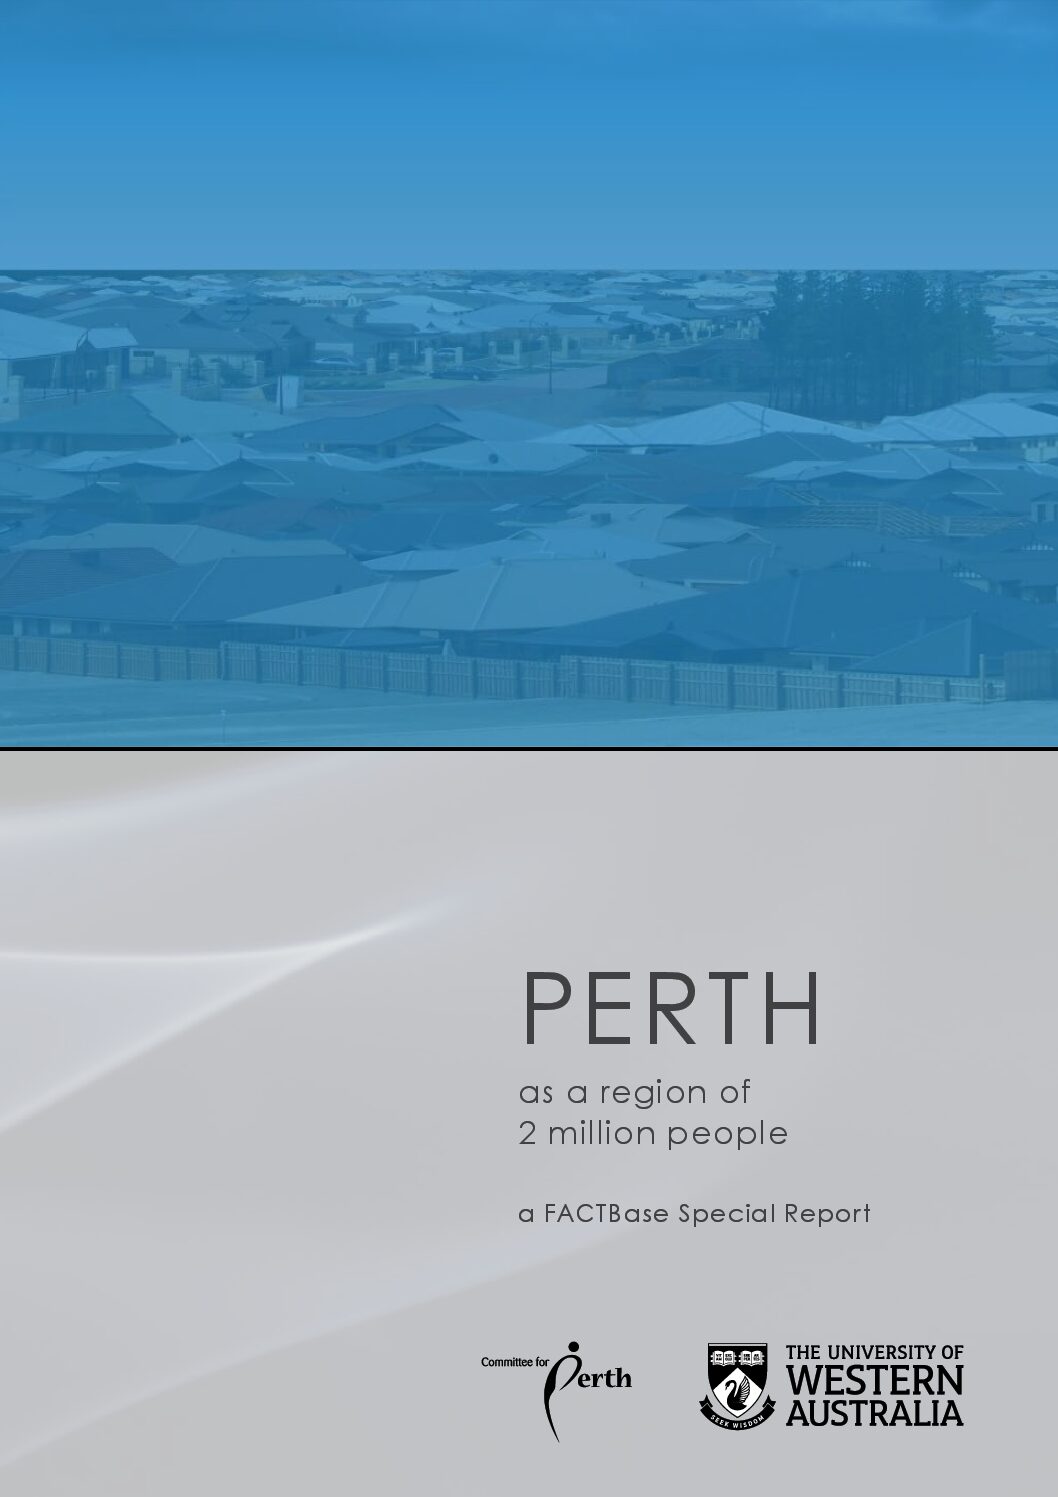 FACTBase Special Report - Perth as a region of 2 million people - March 2020